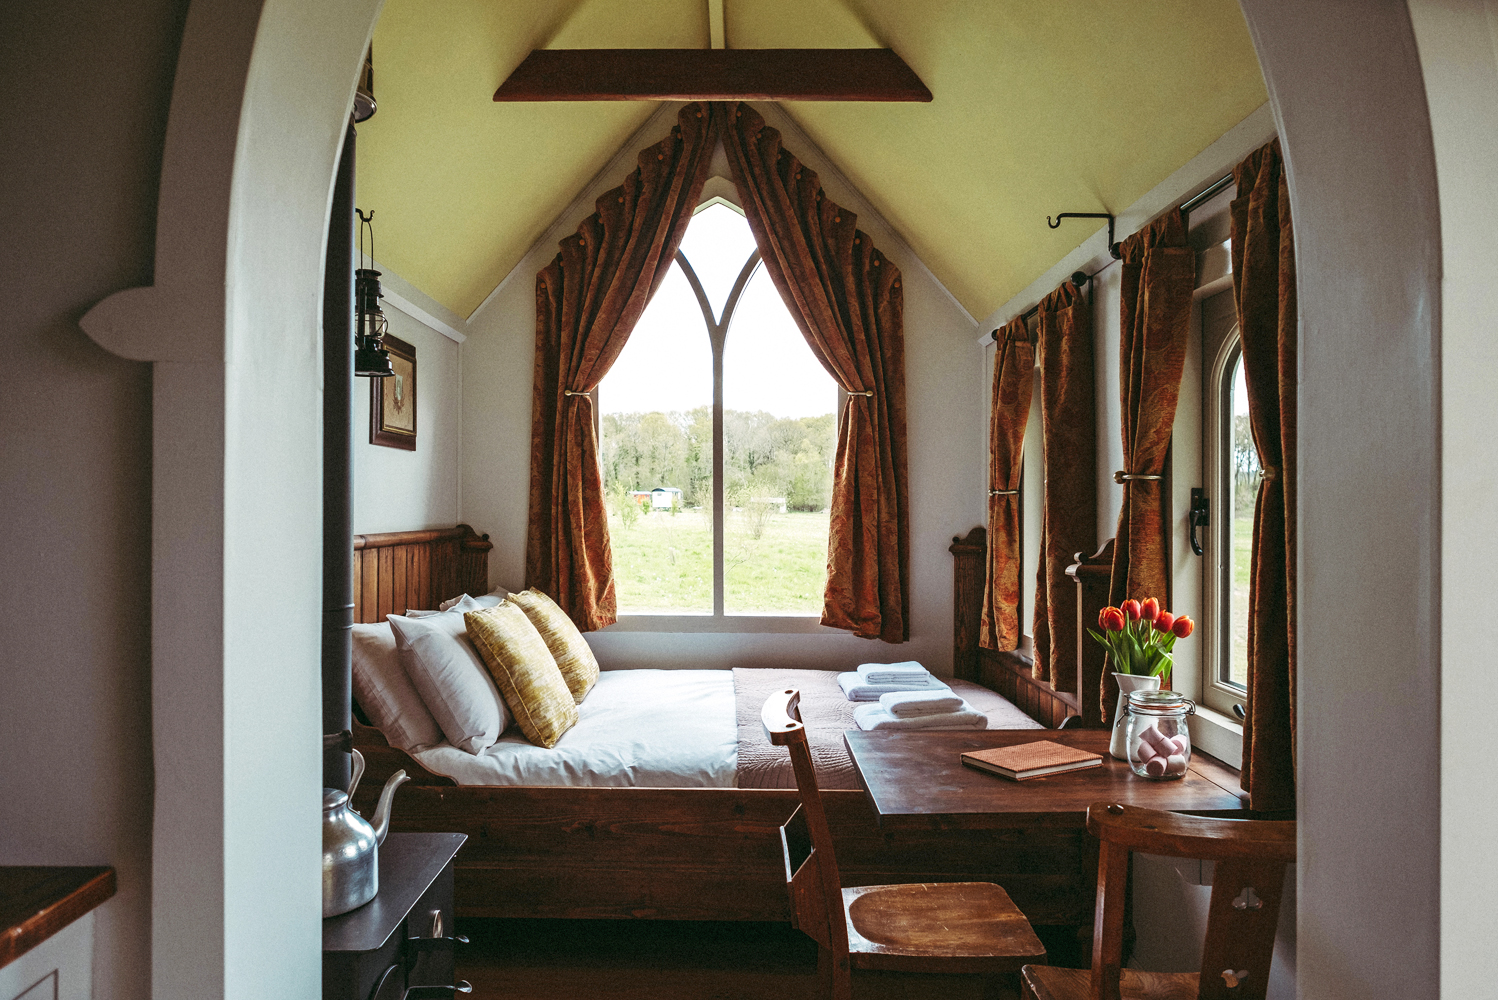 Interior of St Brides replica chapel tiny glamping house with double bed, arched ceiling and windows looking out onto the meadow. Enjoy this space during your shepherds hut holidays in Hampshire